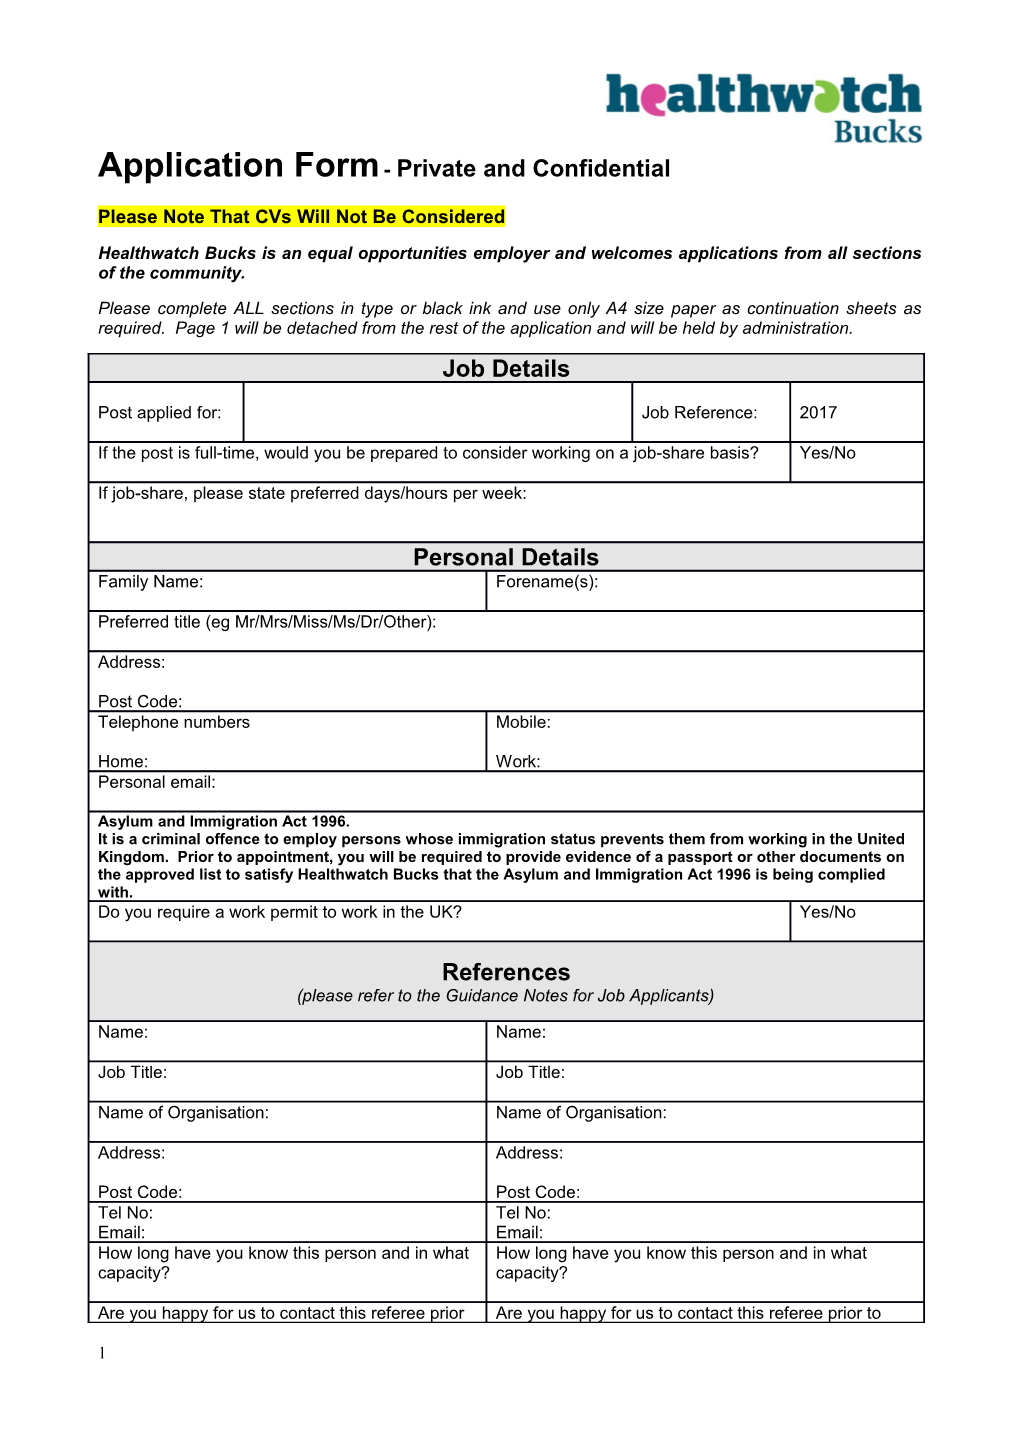 Application Form- Private and Confidential